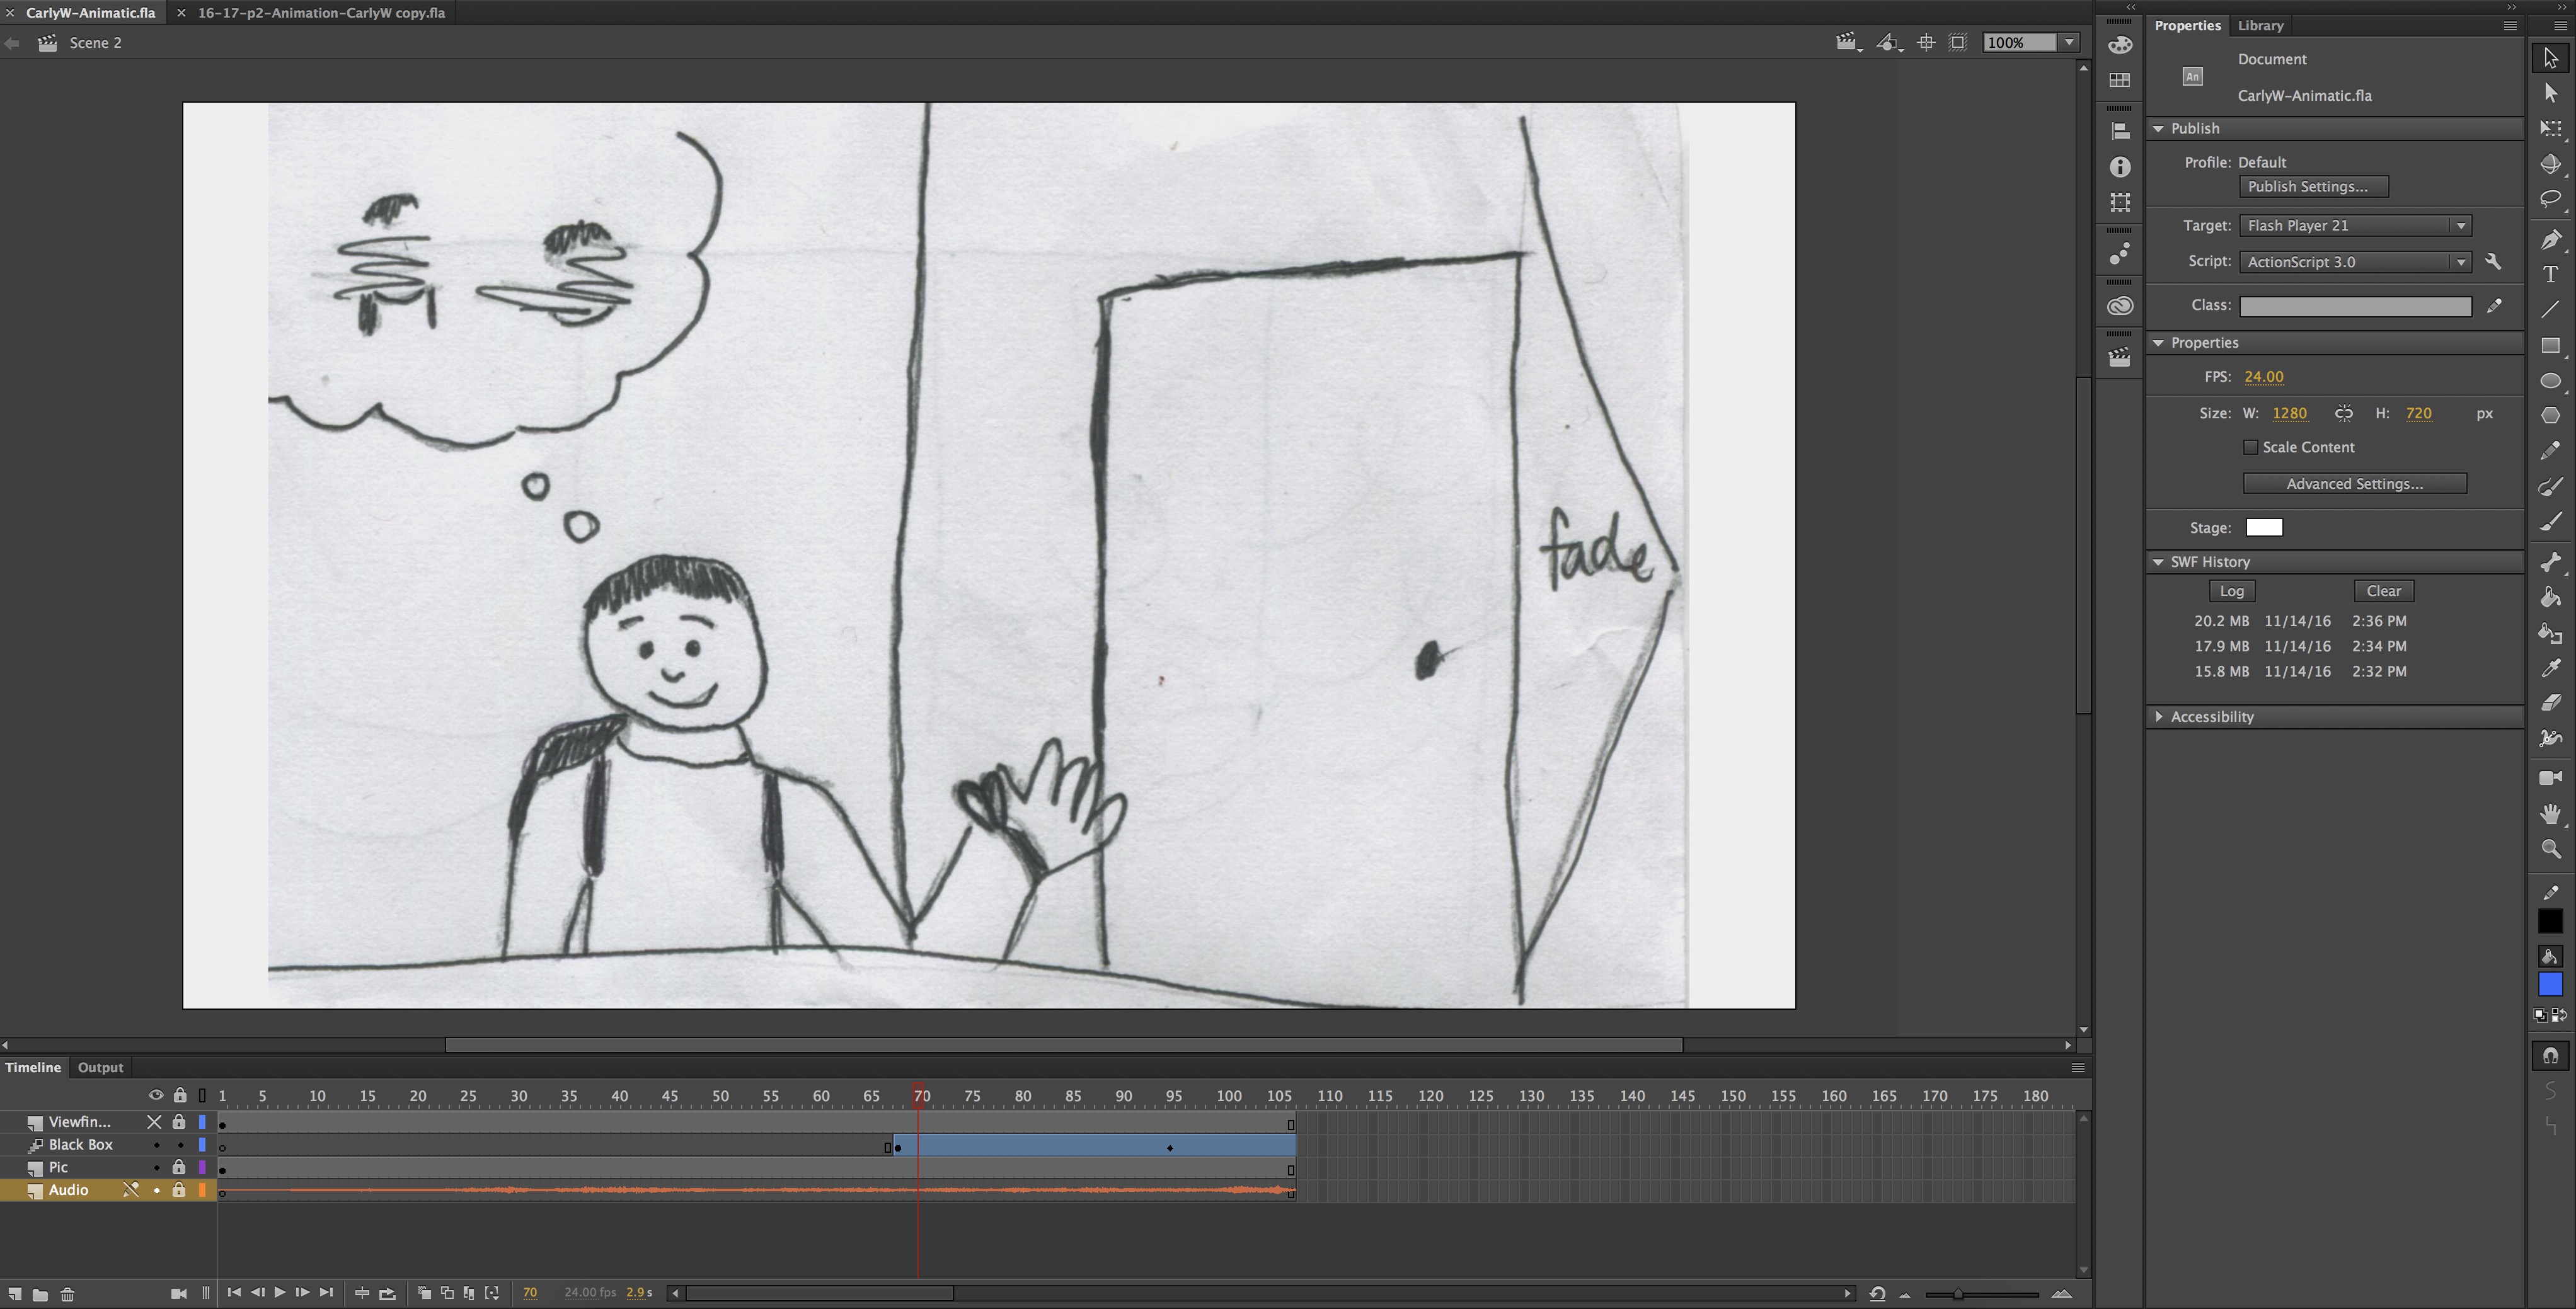 Screenshot of Animate session for my animatic